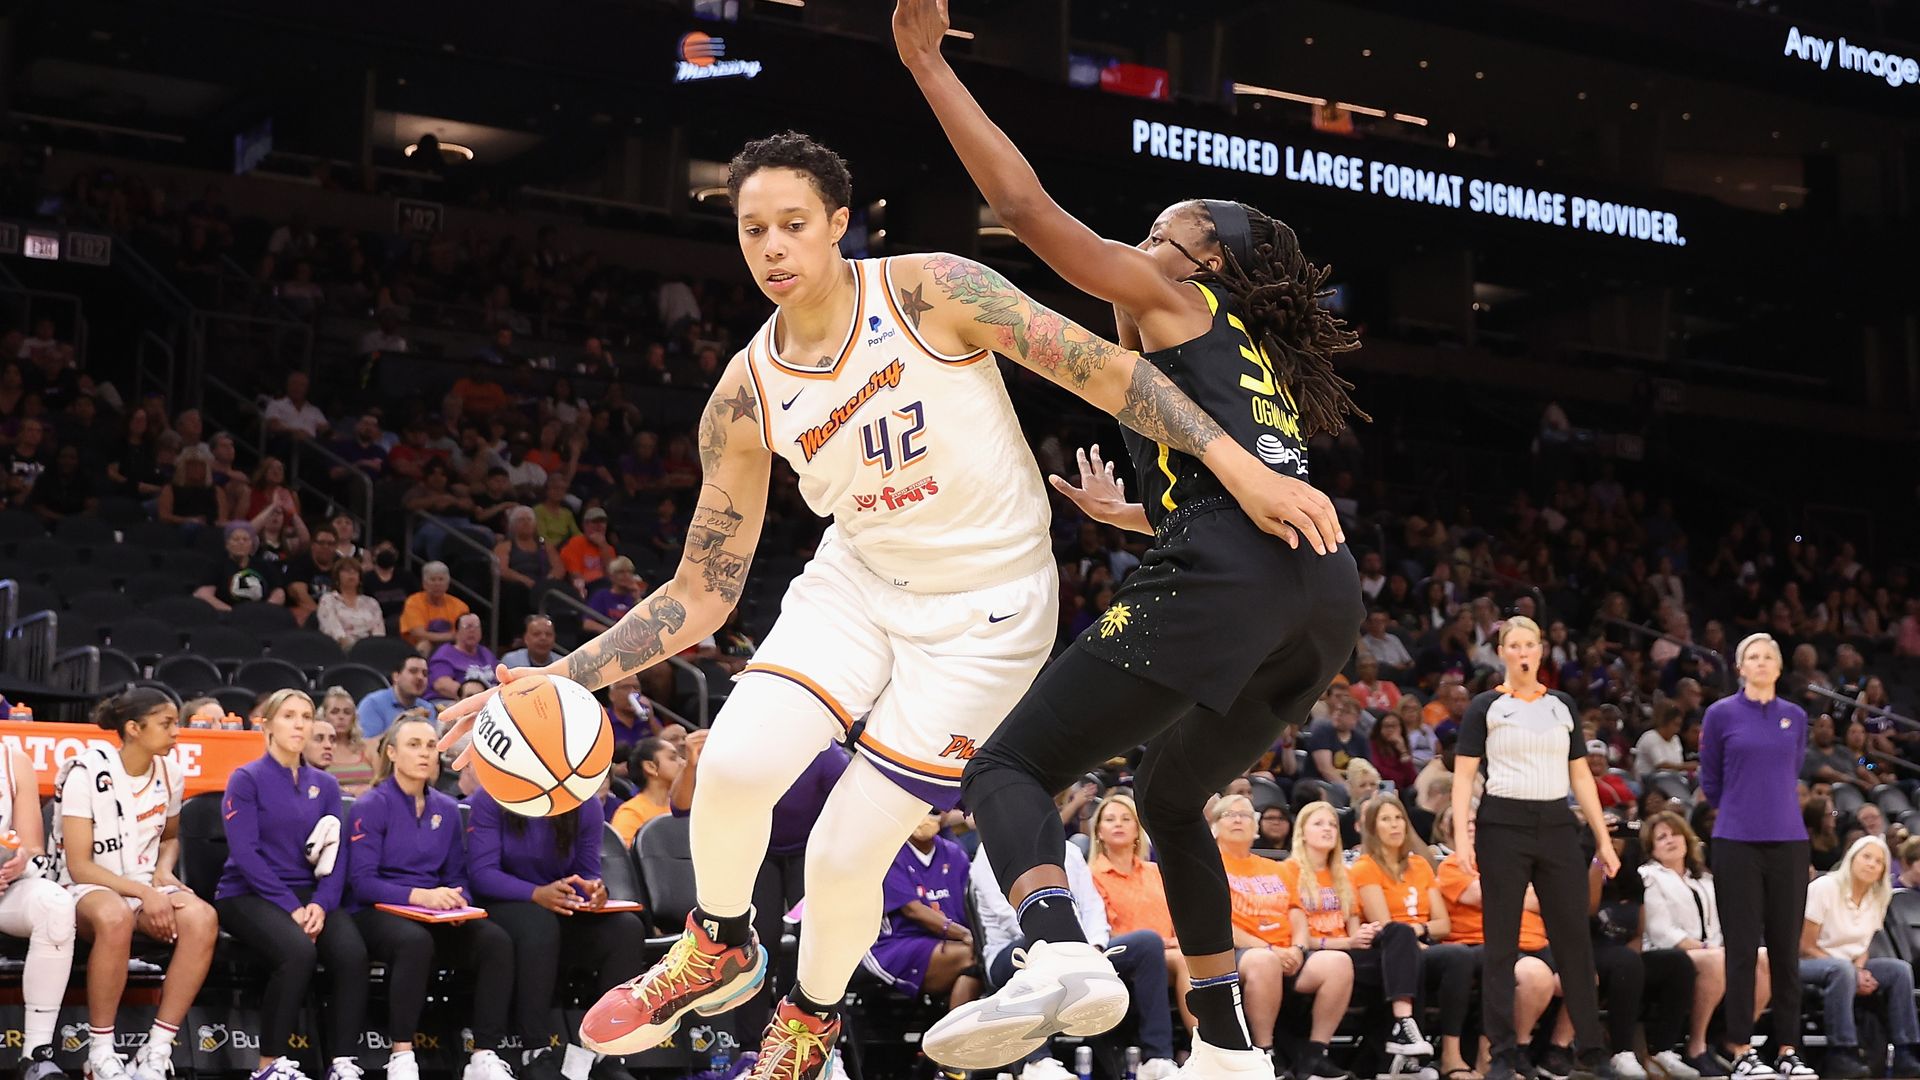 Brittney Griner dribbles a basketball past Chiney Ogwumike.